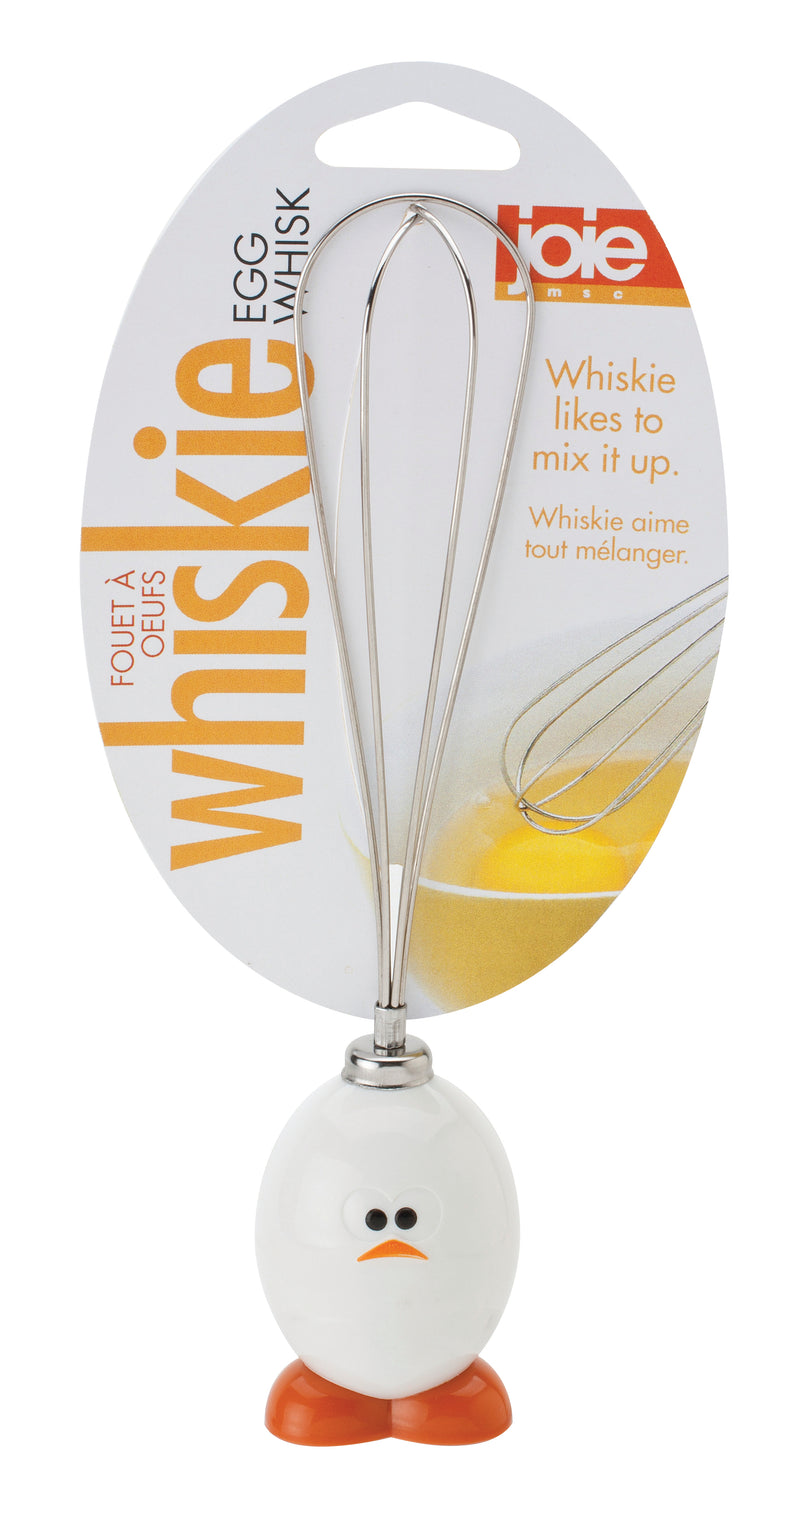 products/96019_WhiskieEggWhisk_C.jpg